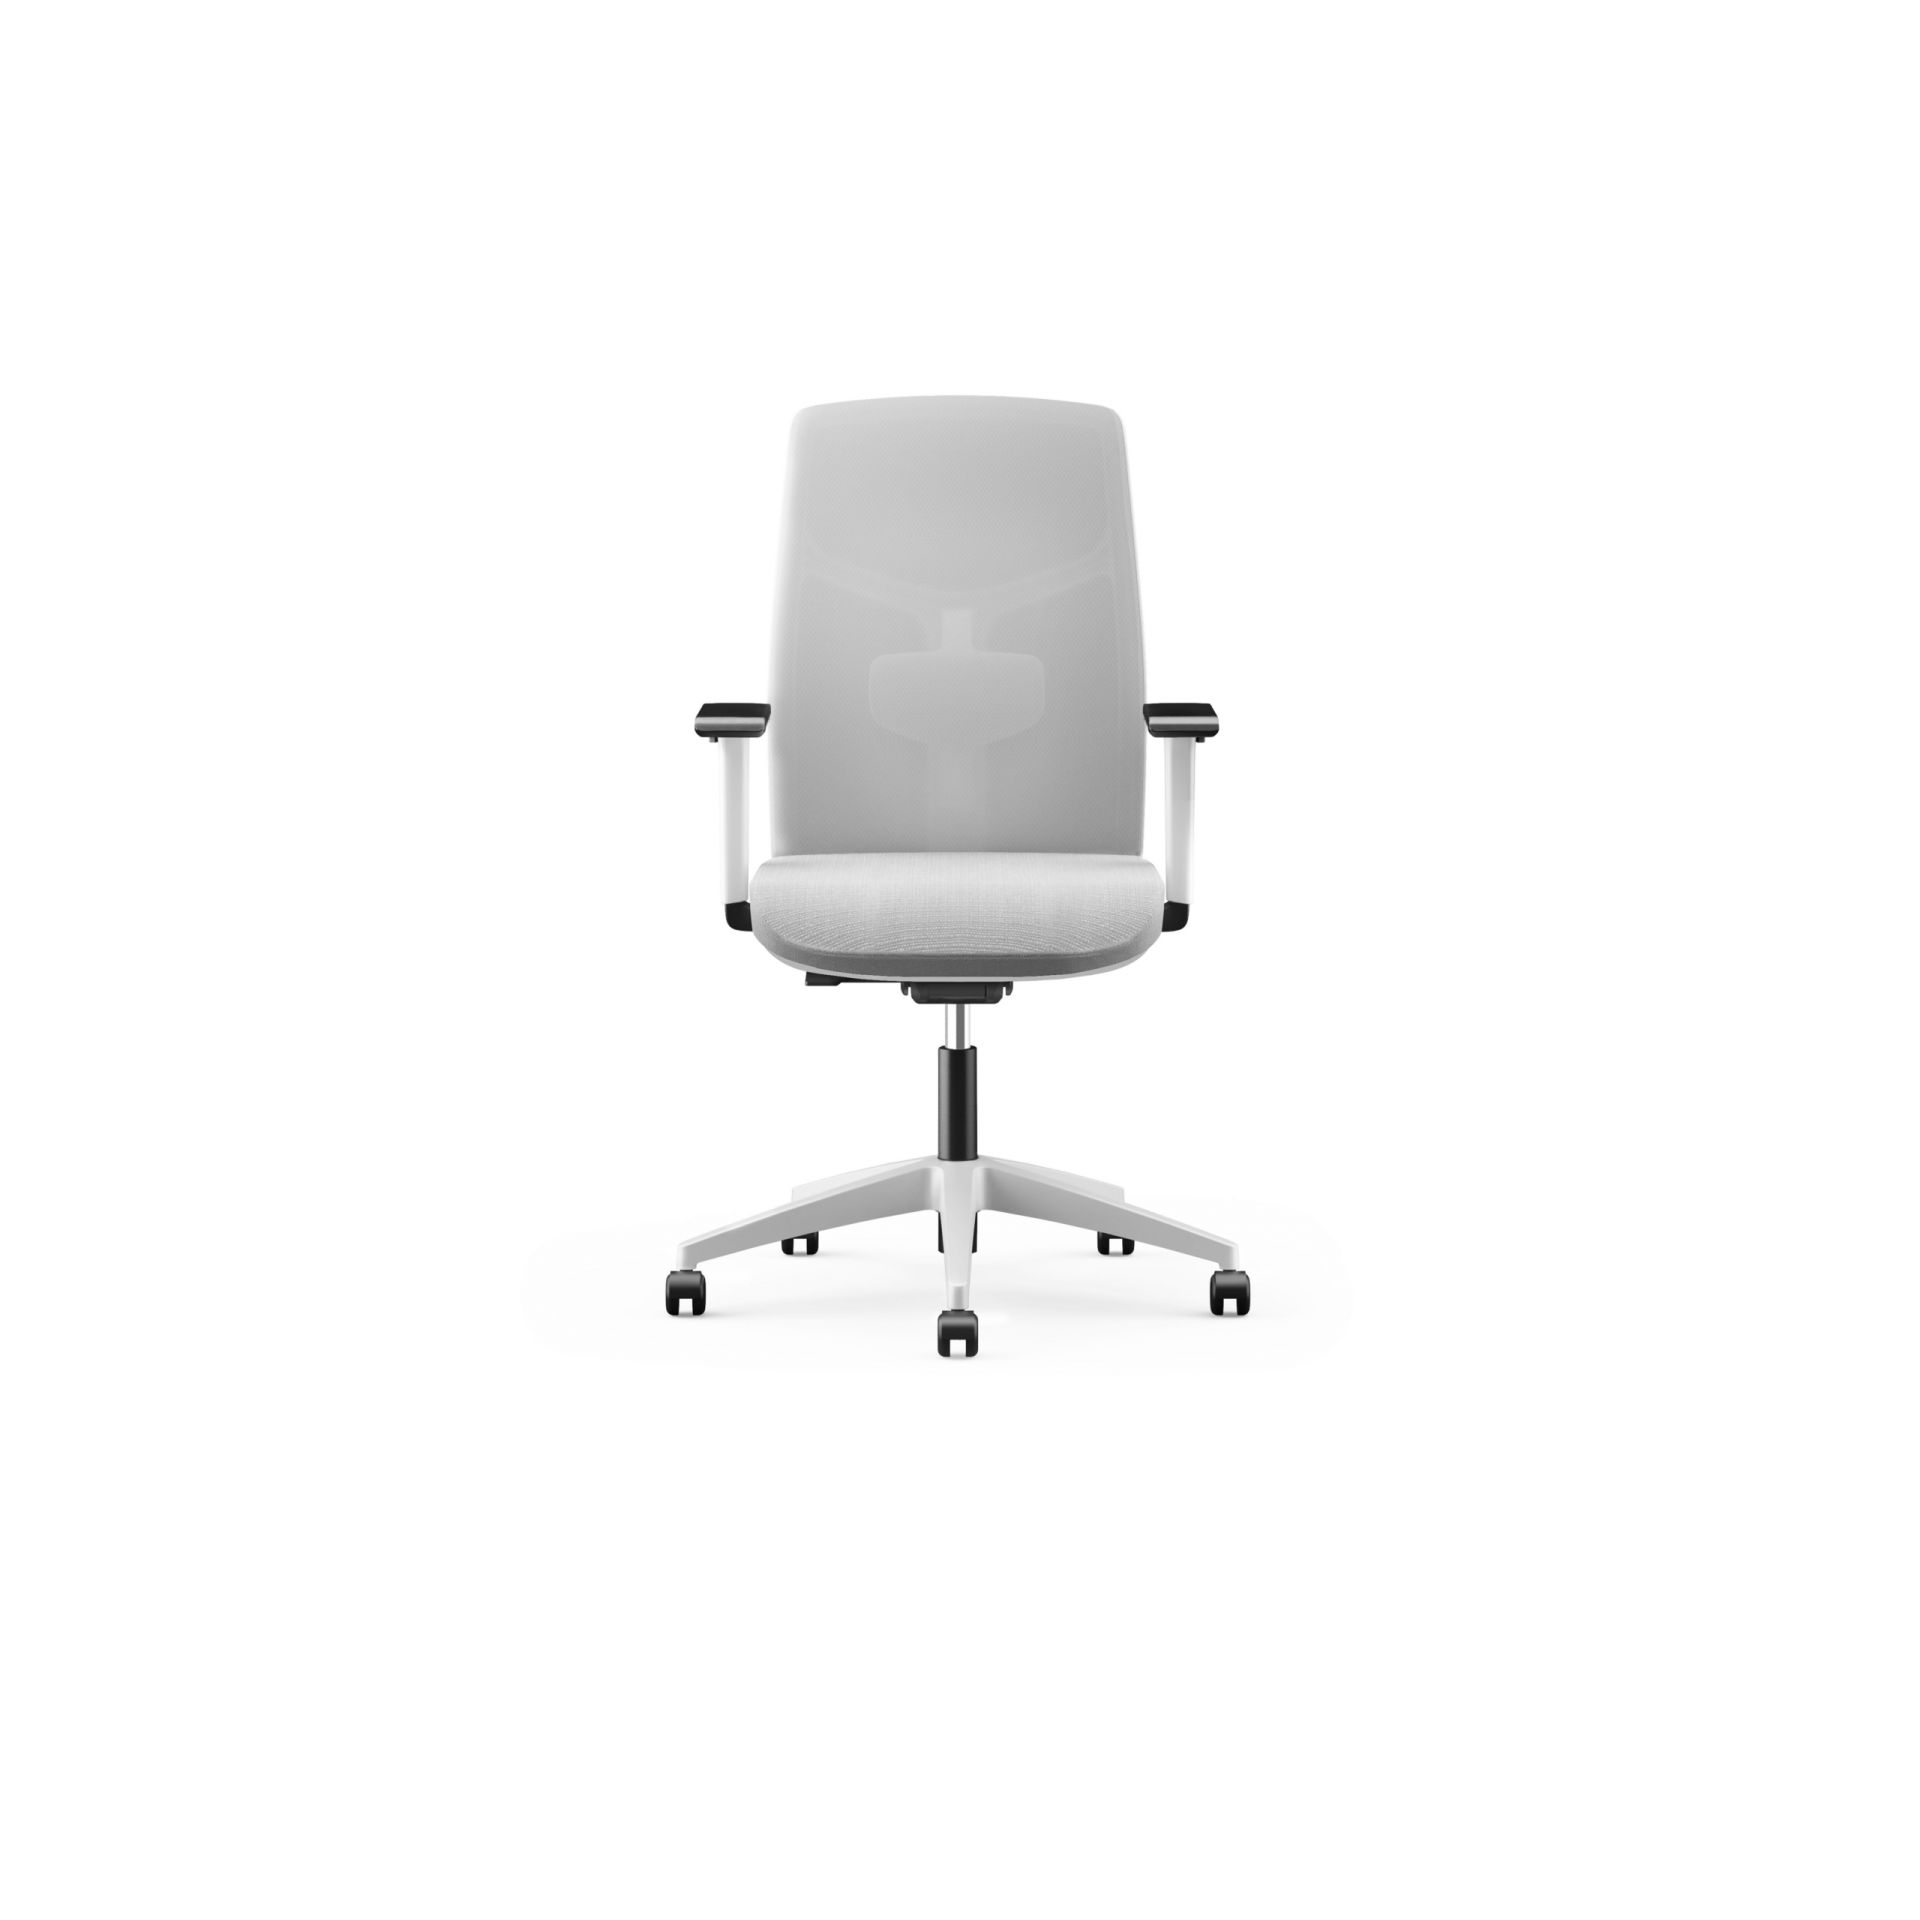 Yoyo Office chair with mesh back product image 3